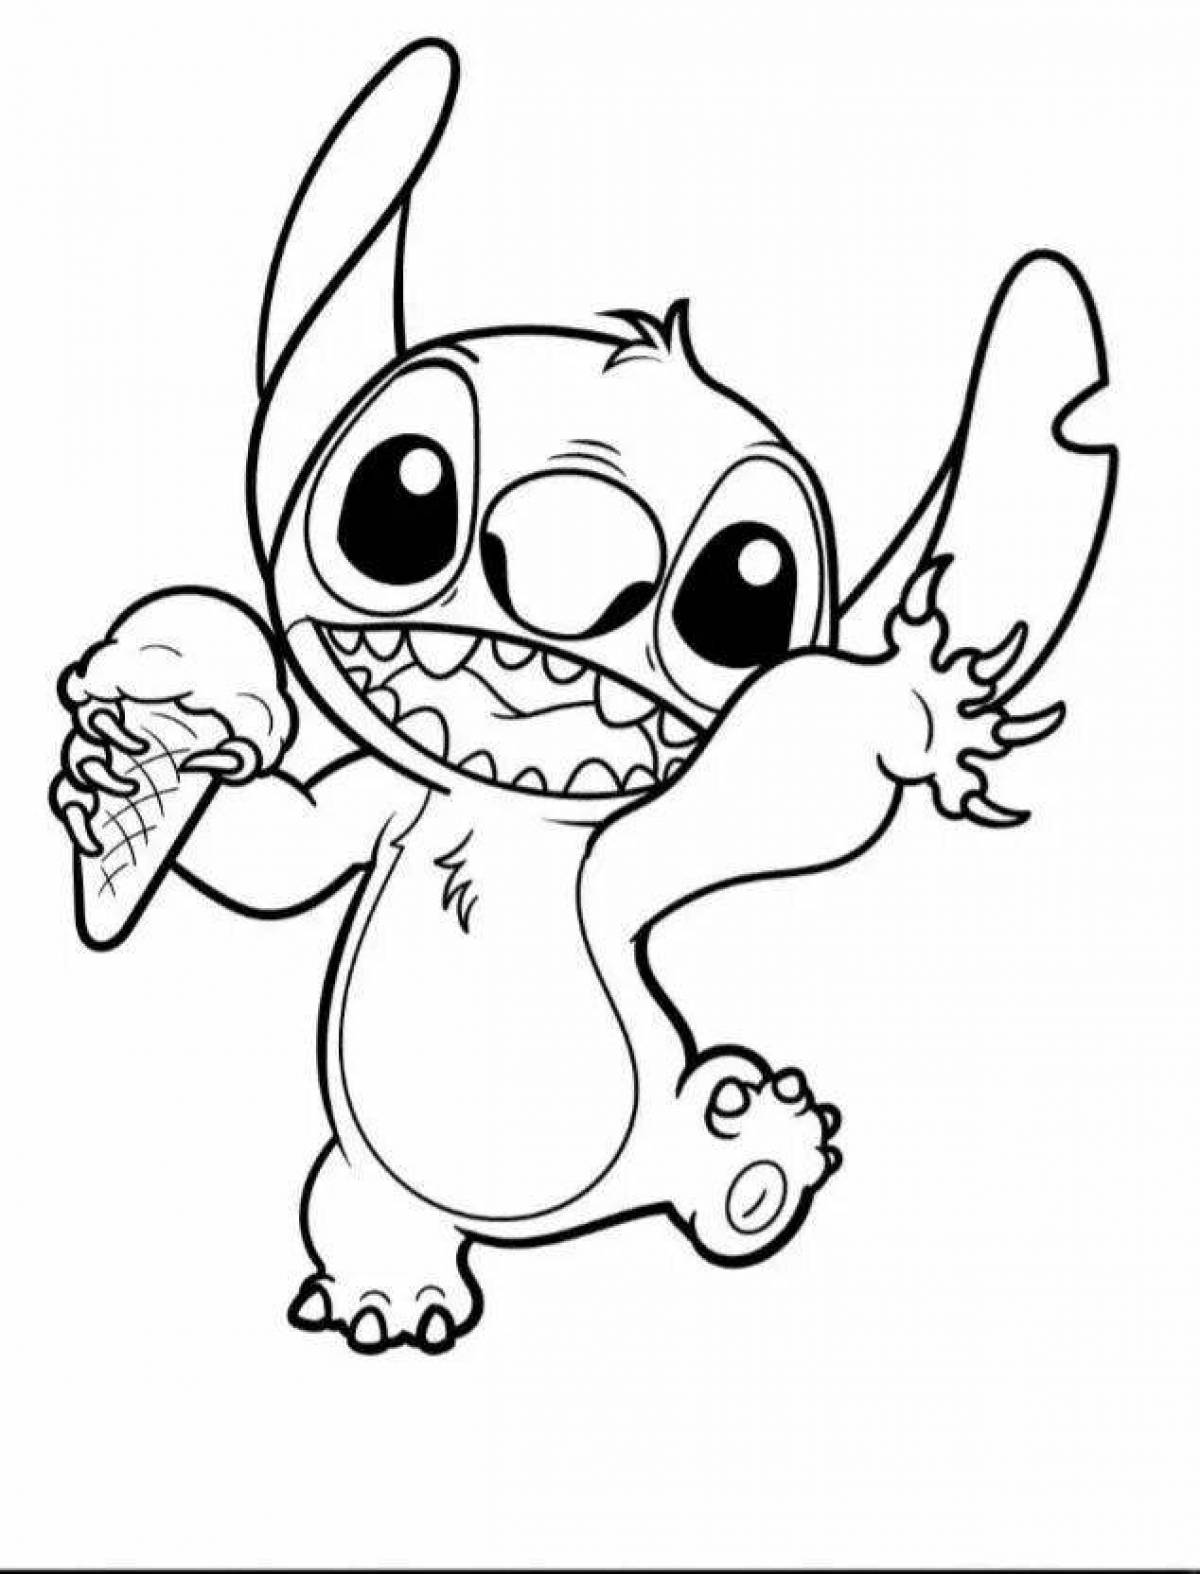 Adorable stitch and angel coloring page